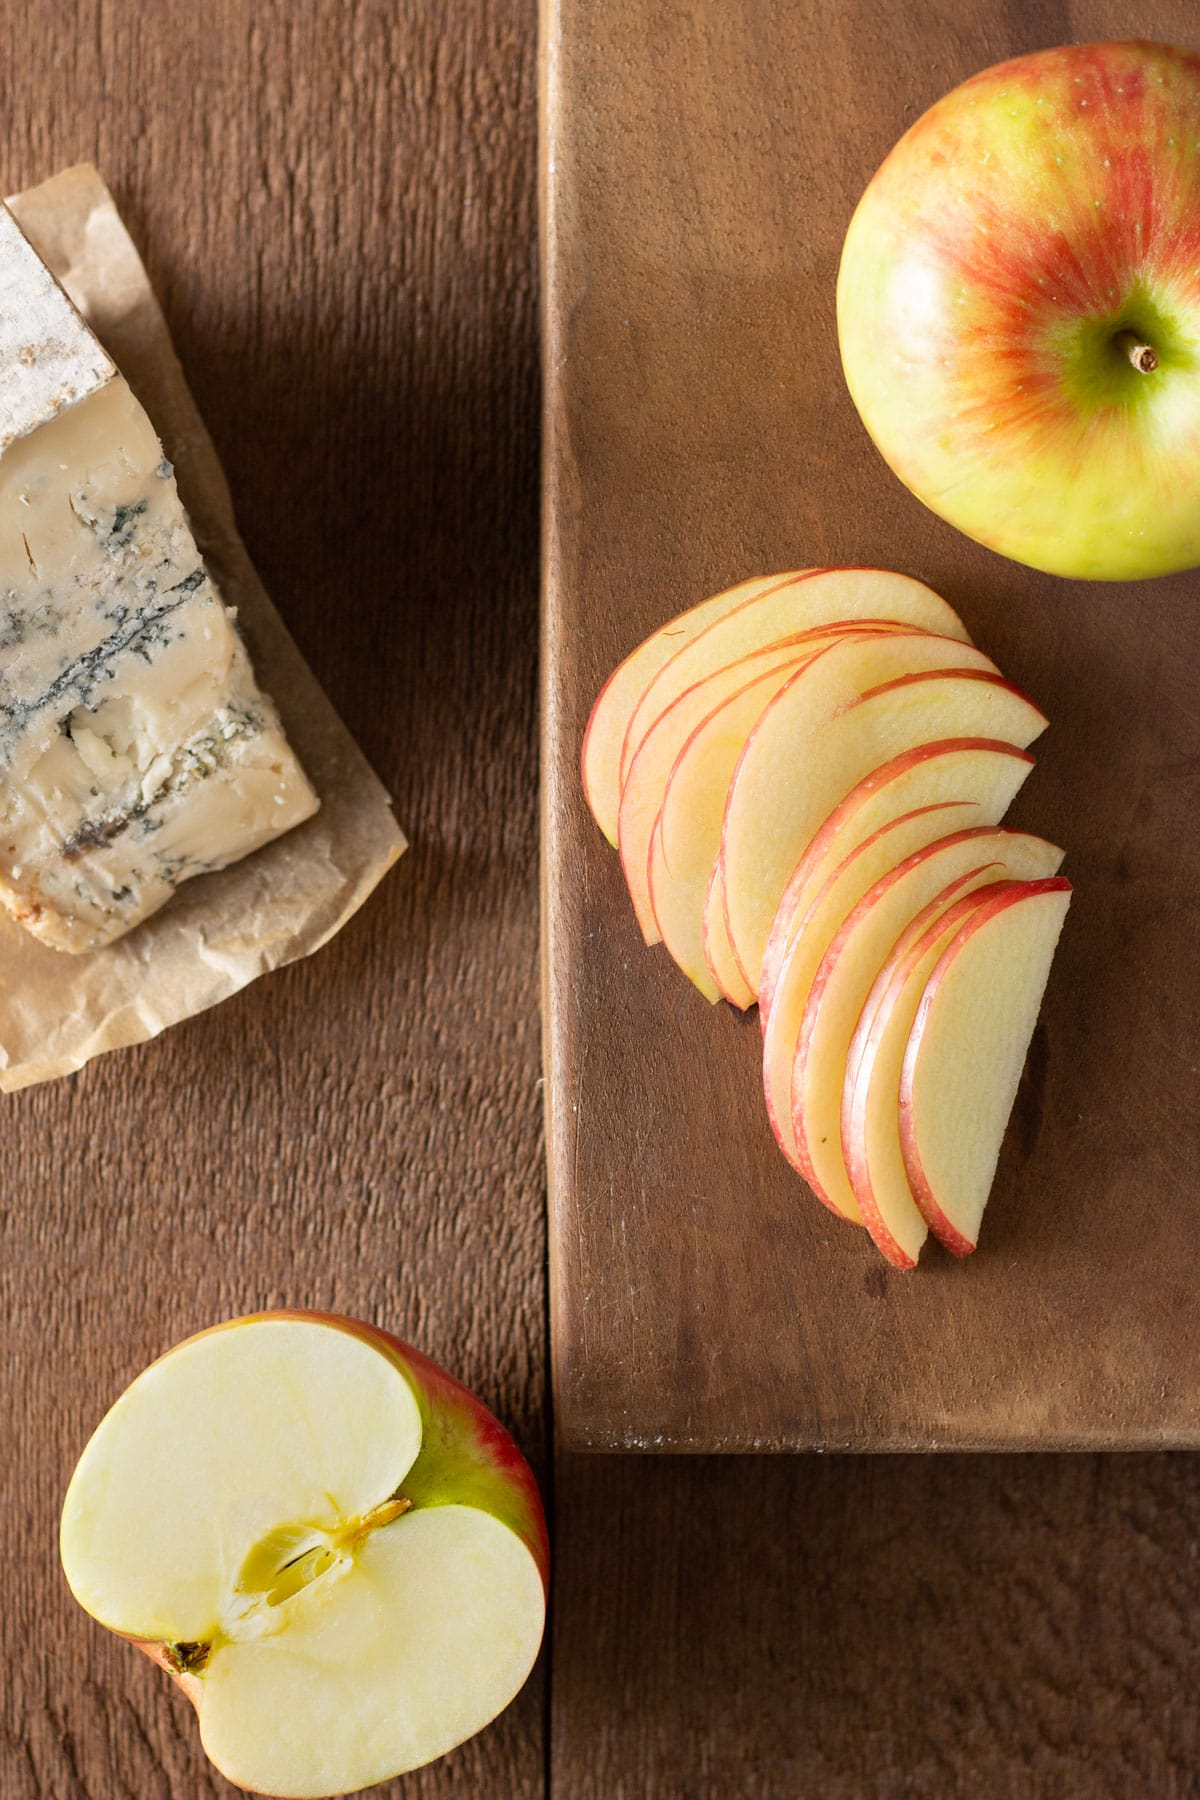 Overhead view of whole and sliced apples and a wedge of blue cheese on a cutting board on a wood surface.